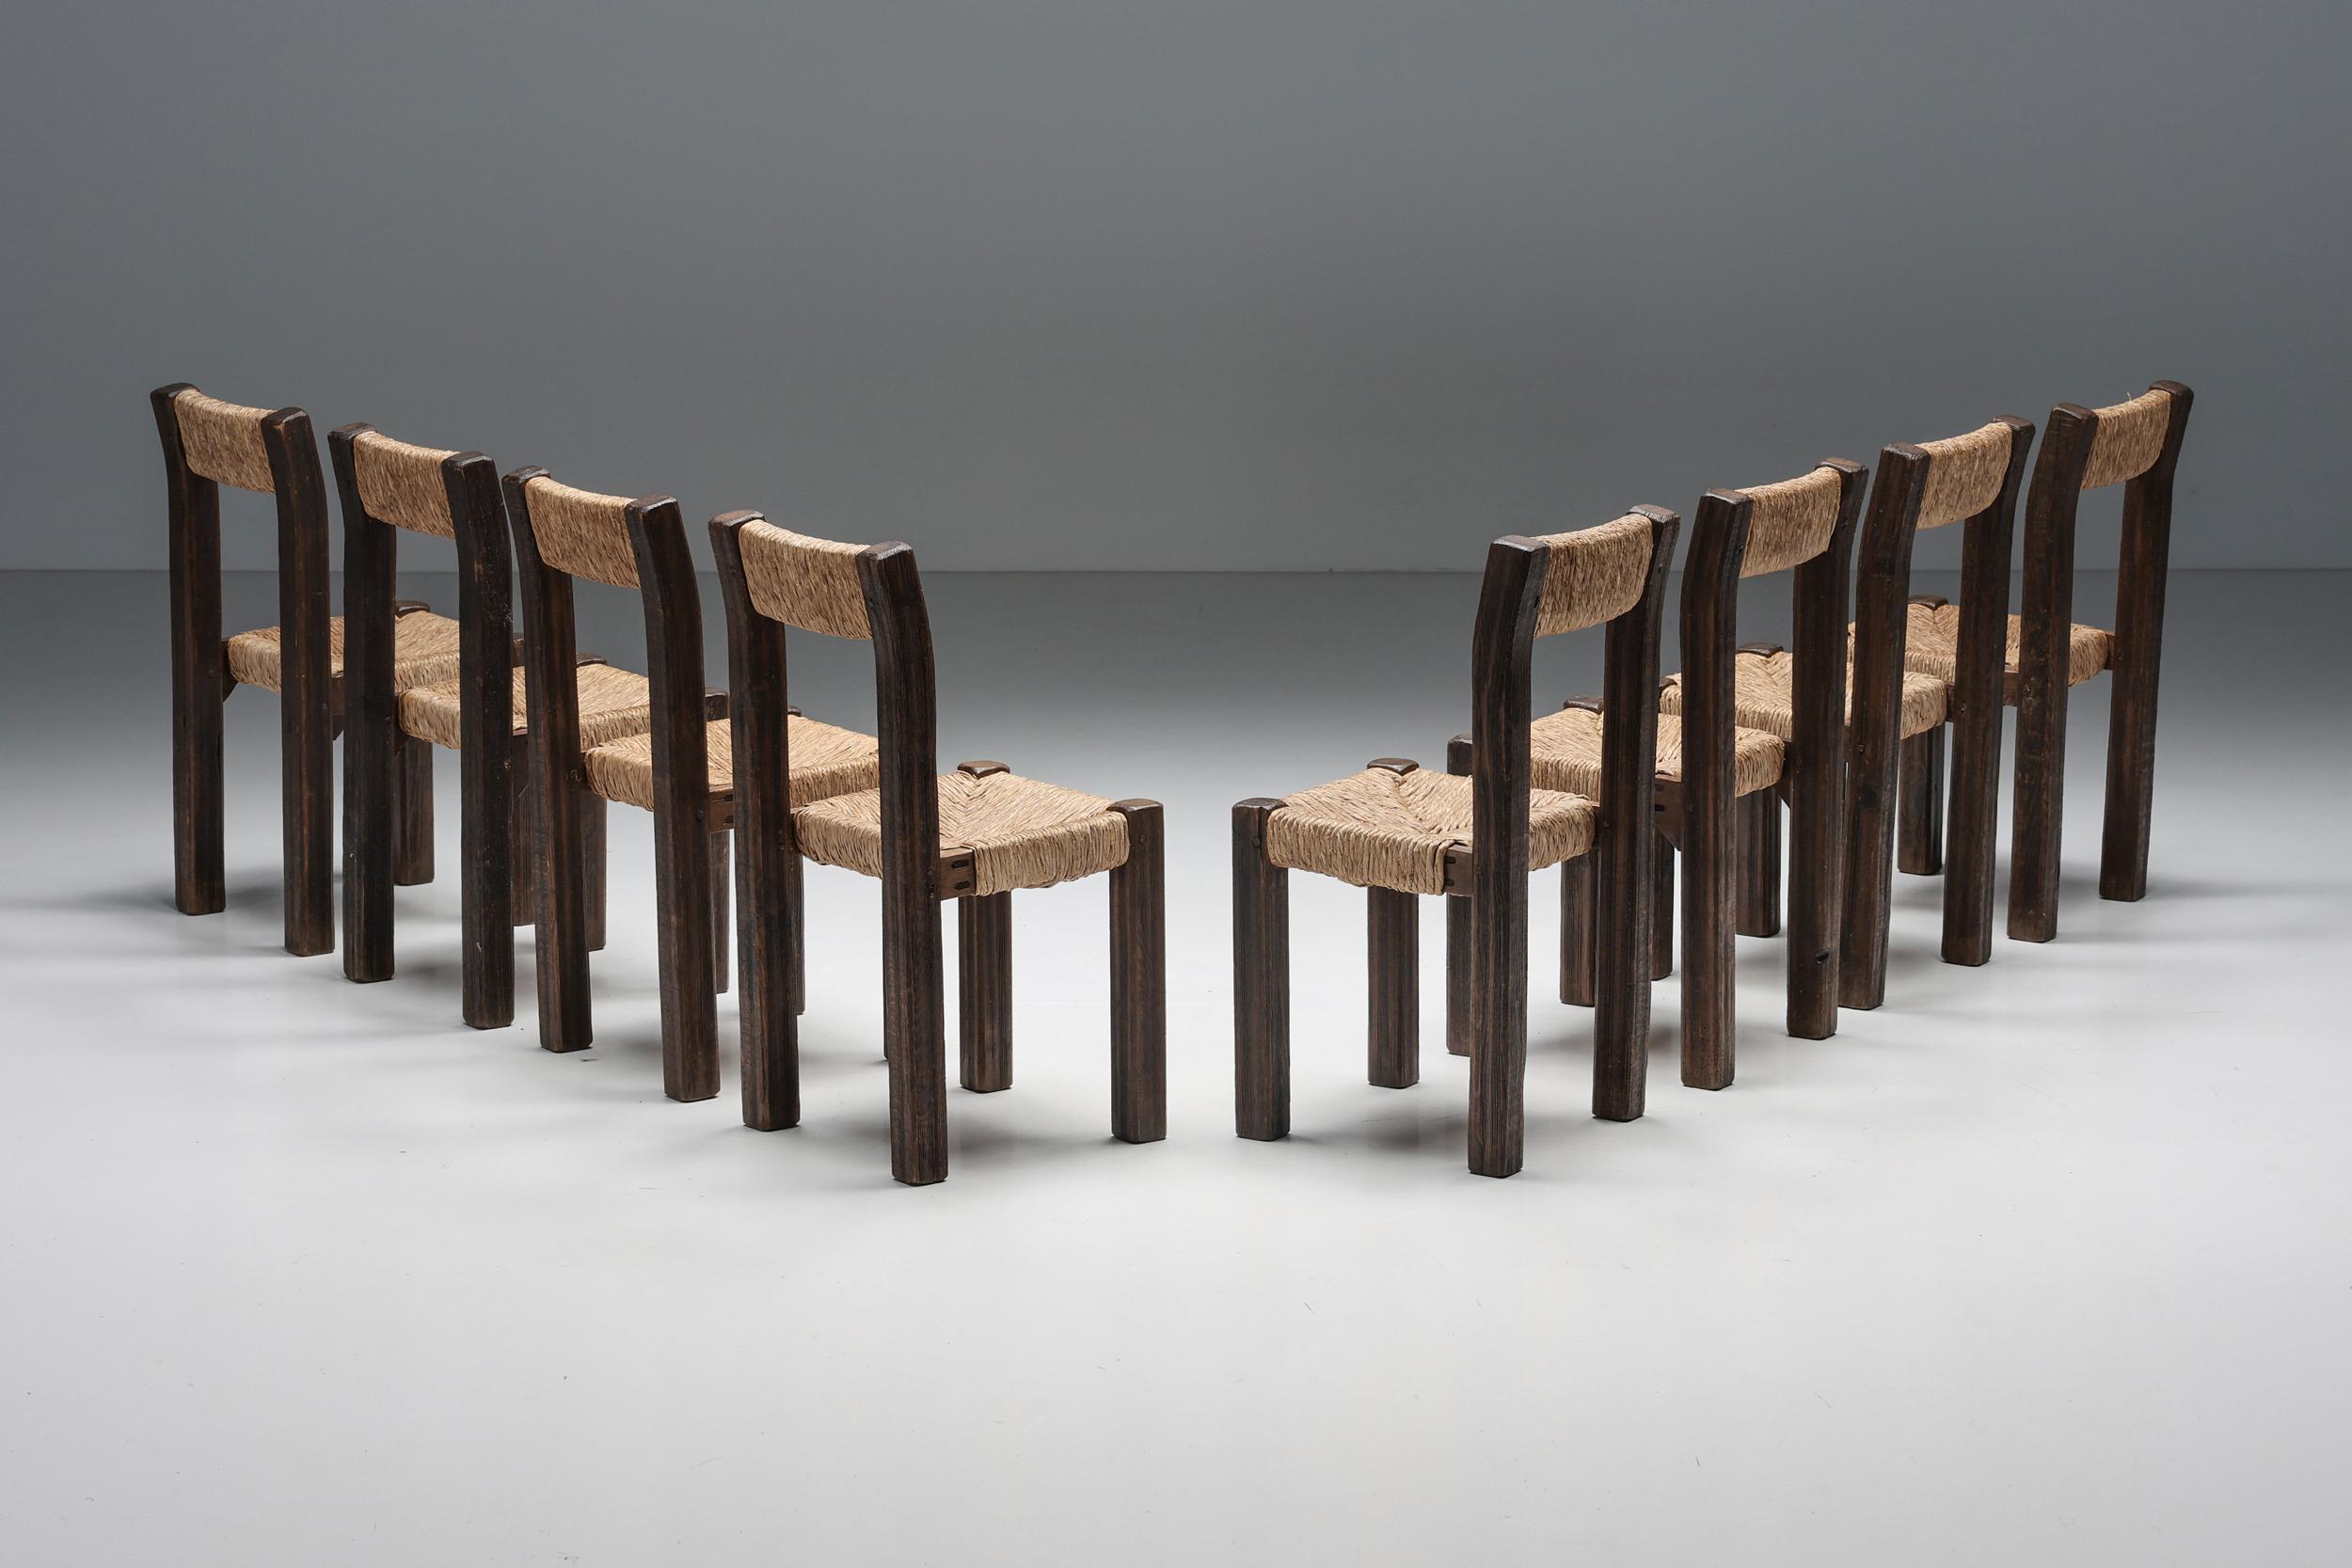 Set of 8 French dining chairs with straw seating, a remarkable example of raw elegance and craftsmanship. The imperfect, wabi-sabi wooden structure adds a touch of rustic charm, making these chairs a remarkable example of French artistry. Perfectly